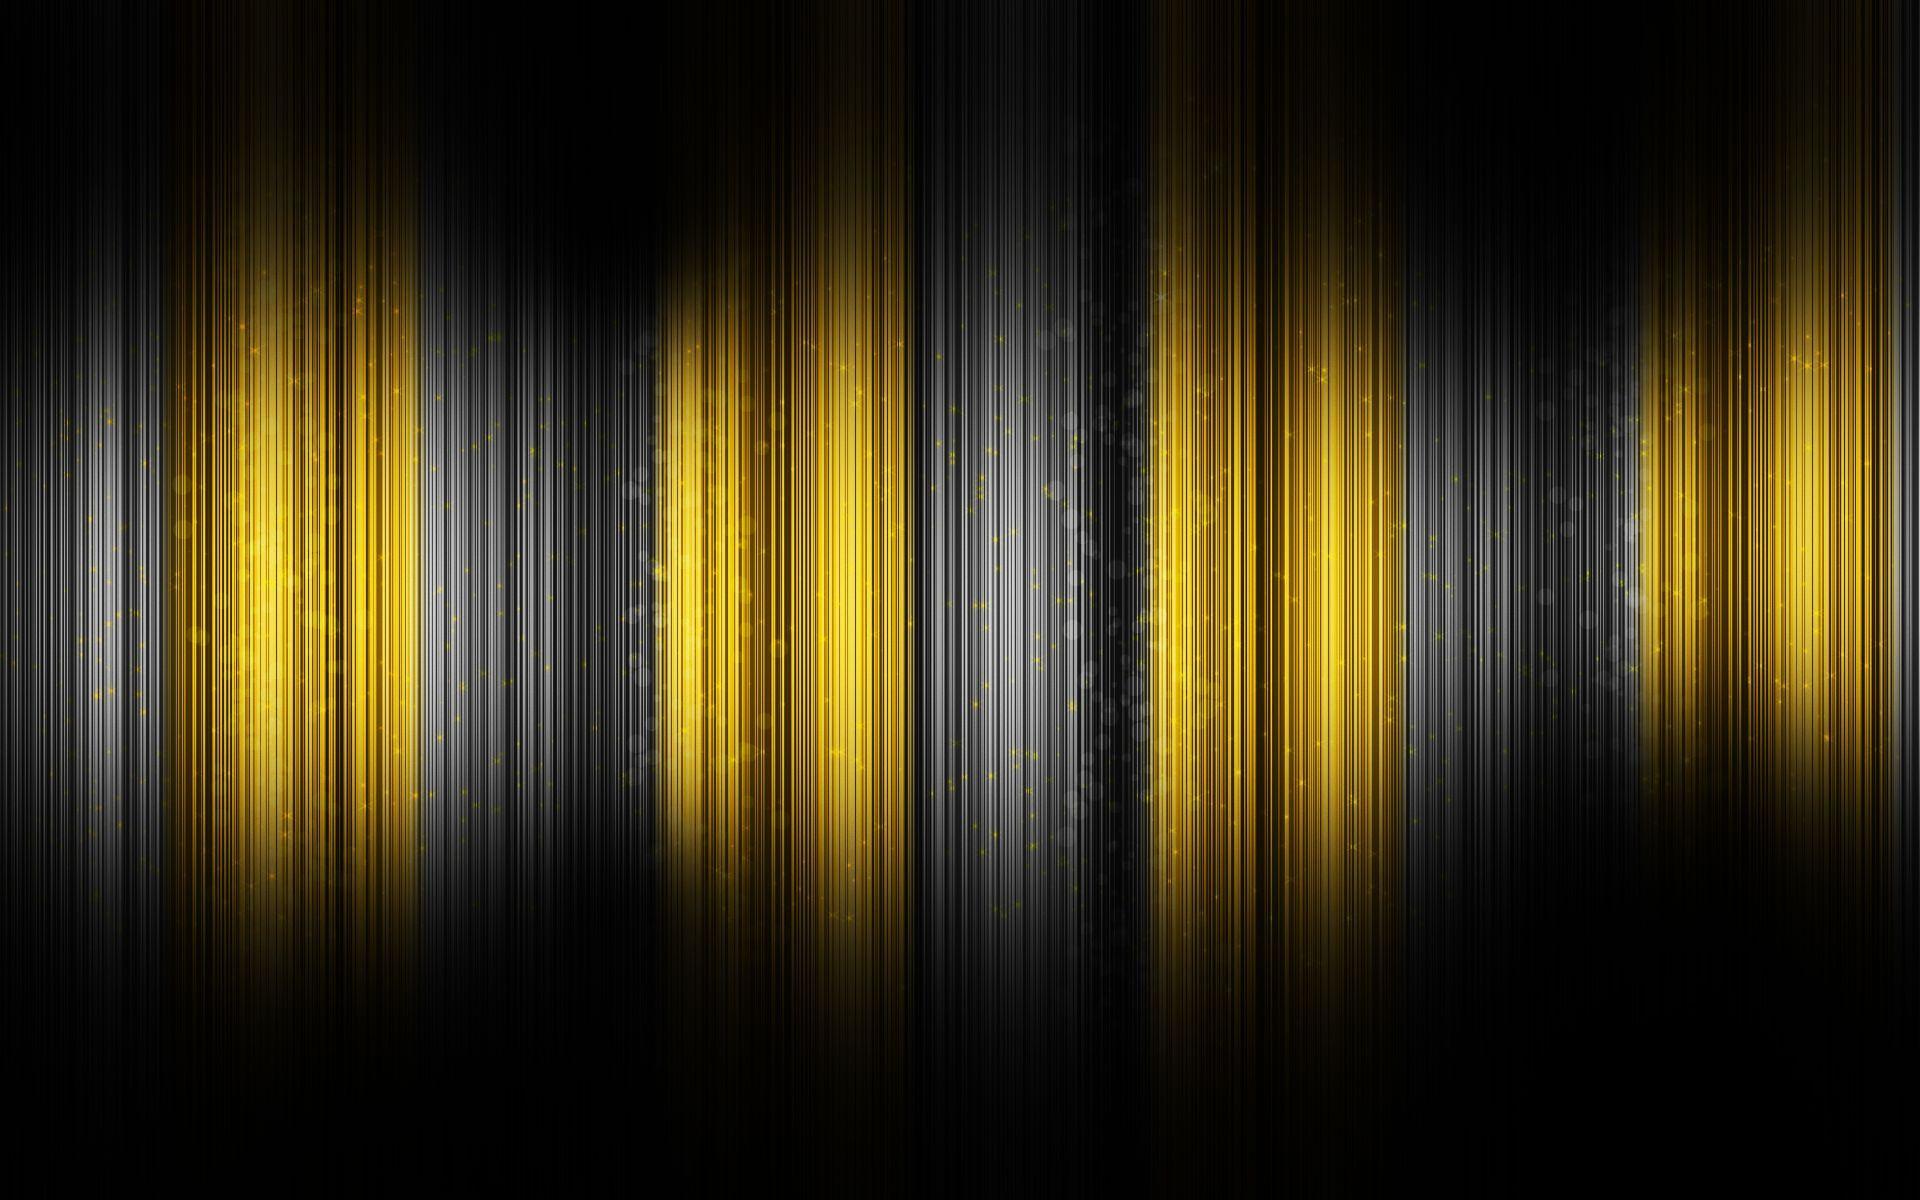 Black and Gold Abstract Desktop Wallpapers - Top Free Black and Gold